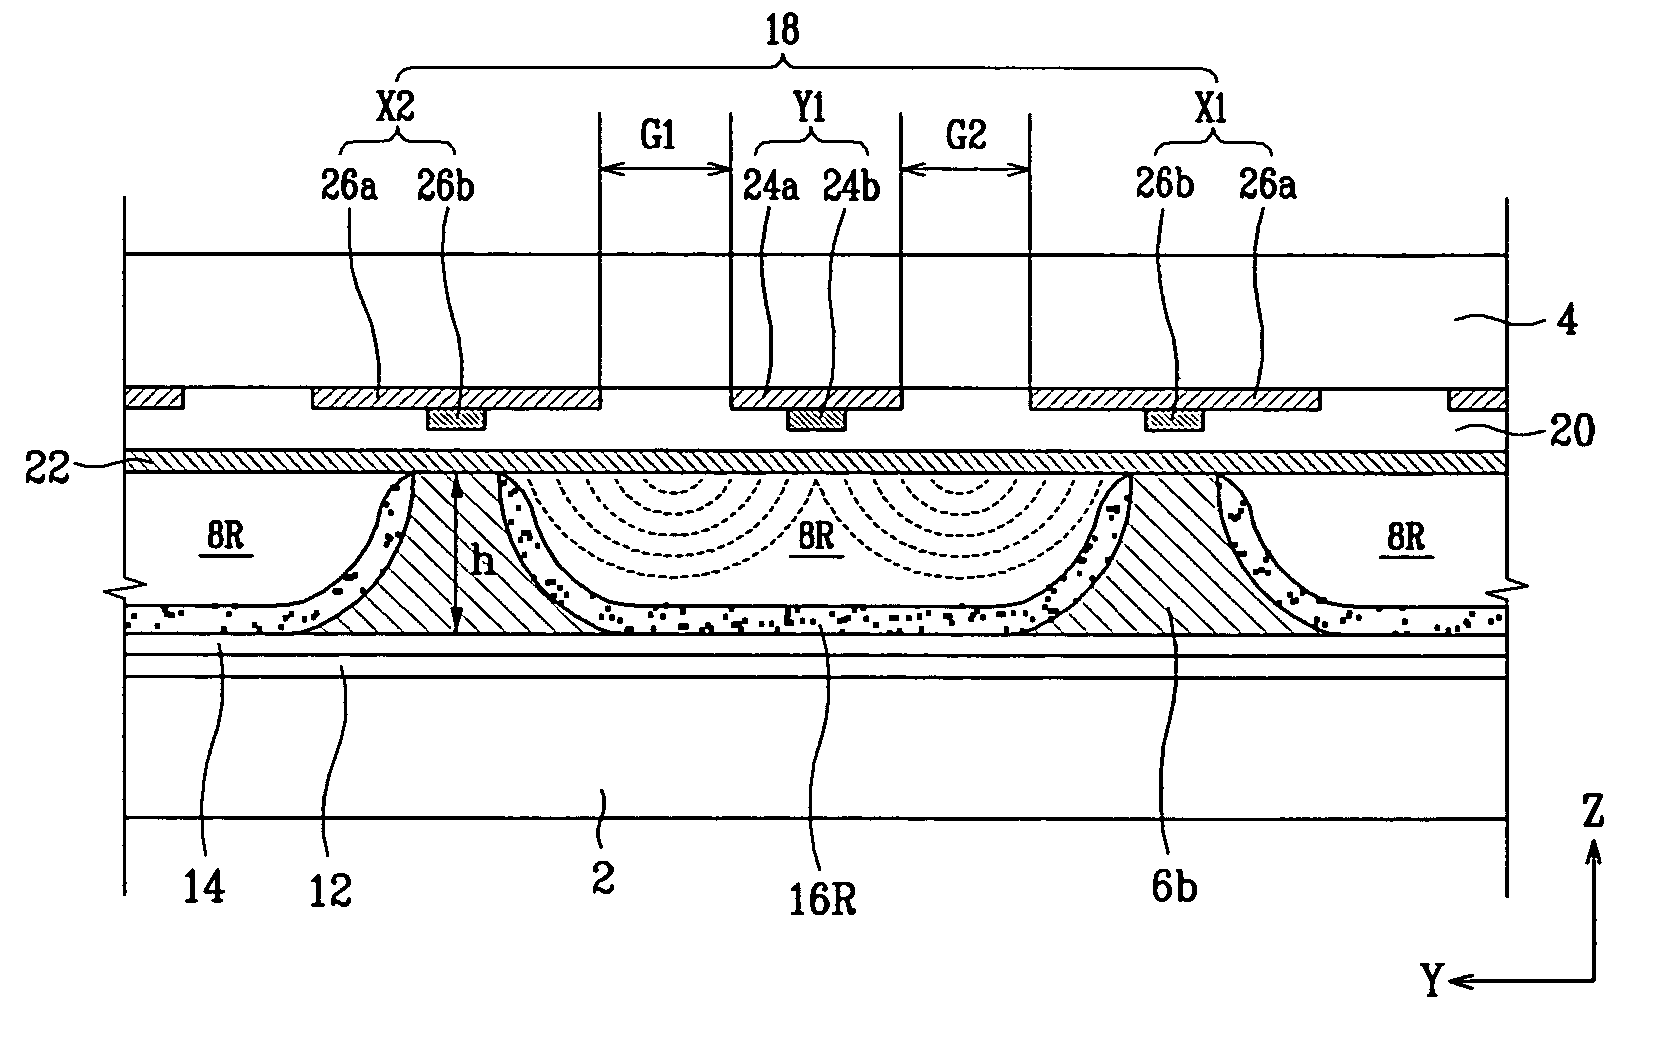 Plasma display panel having shared common electrodes mounted in areas corresponding to non-discharge regions